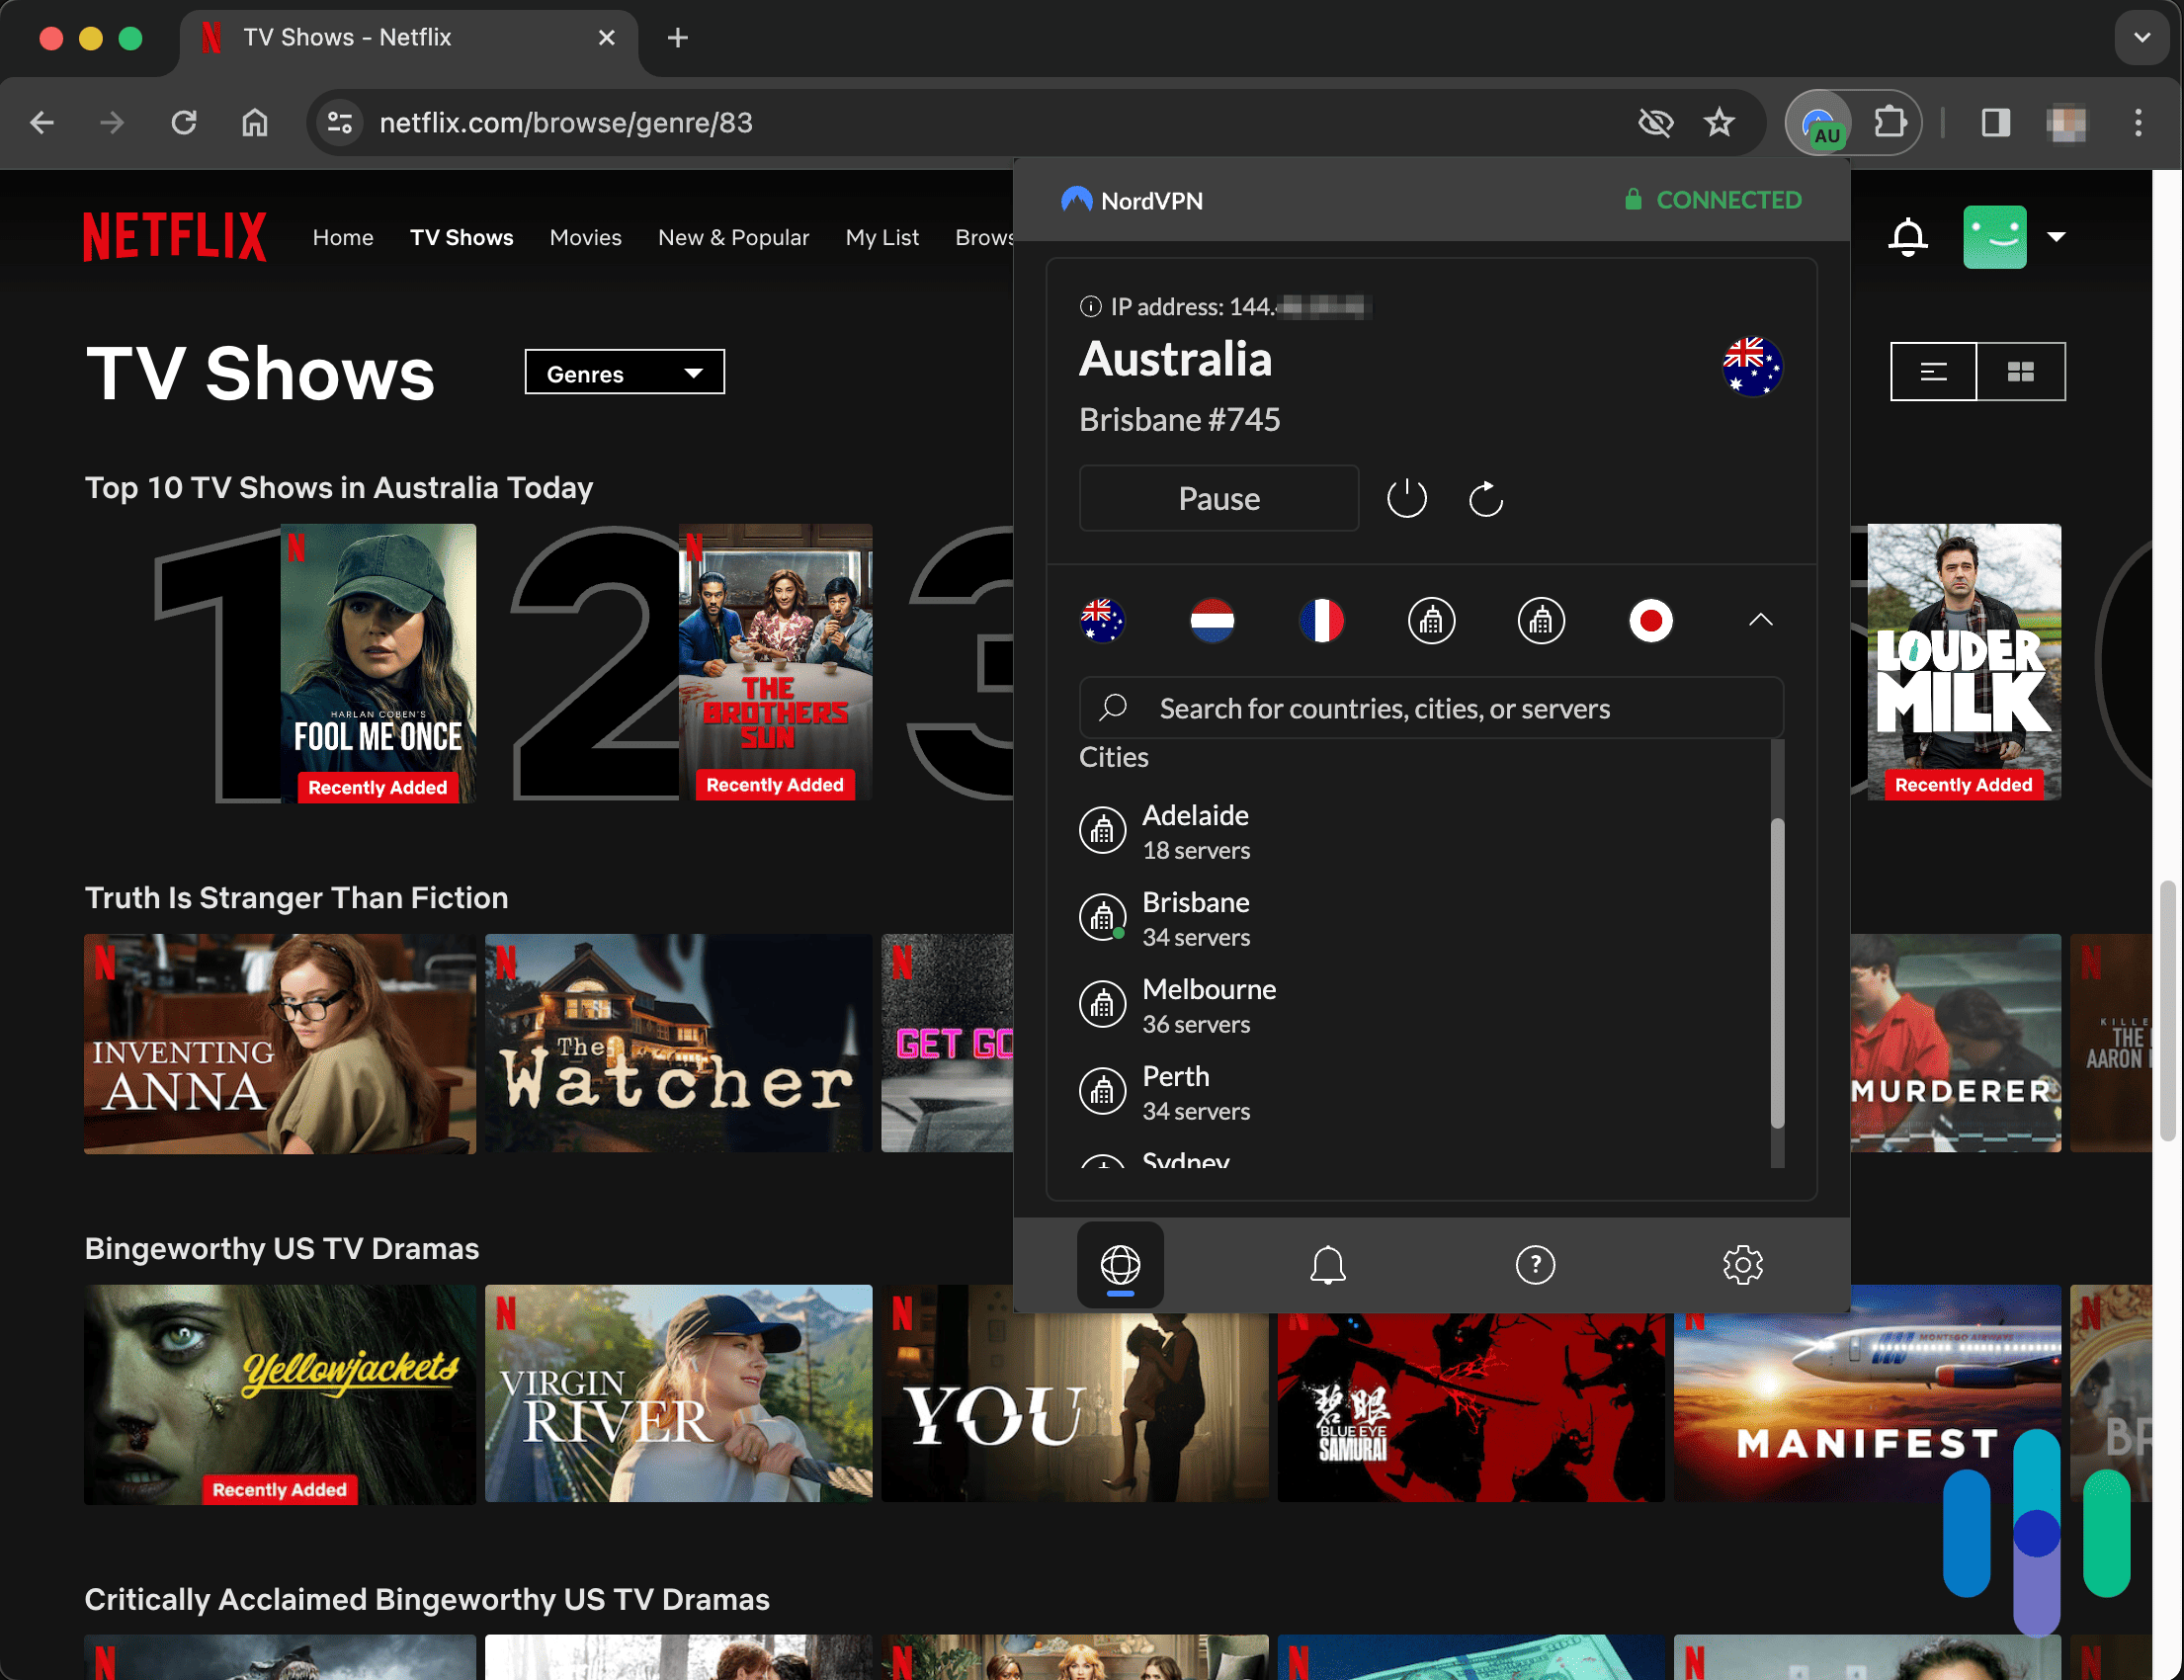 Testing the NordVPN Chrome App connected to Australia while browsing Netflix